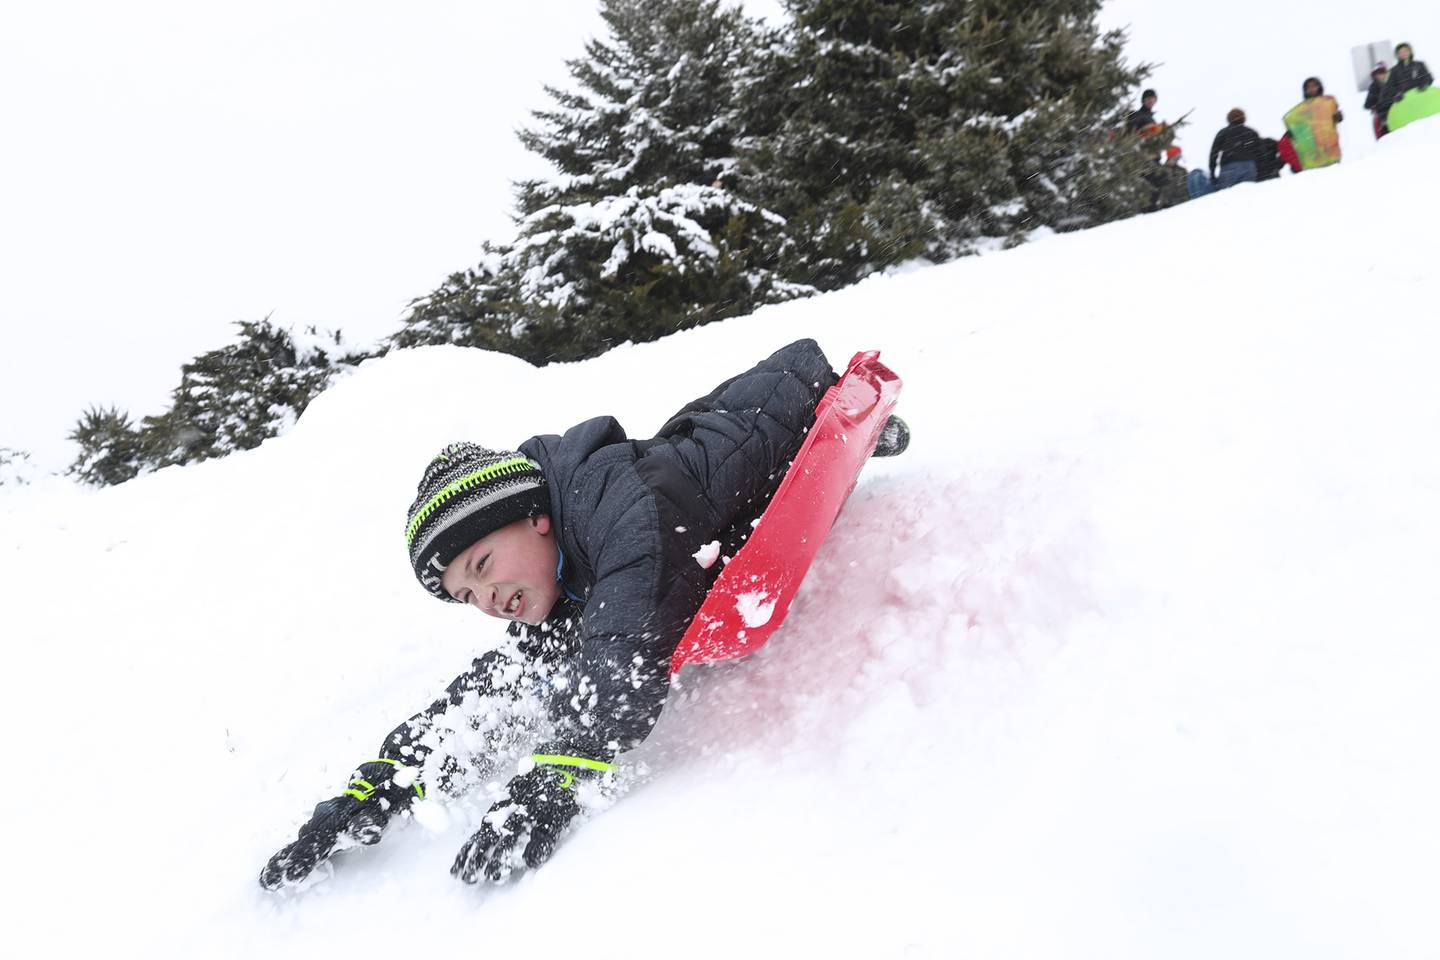 A sledder wipes out after hitting a jump on Sunday, Jan. 31, 2021, at Cene's Four Seasons Park in Shorewood, Ill. Nearly a foot of snow covered Will County overnight, resulting in fun for some and challenges for others.